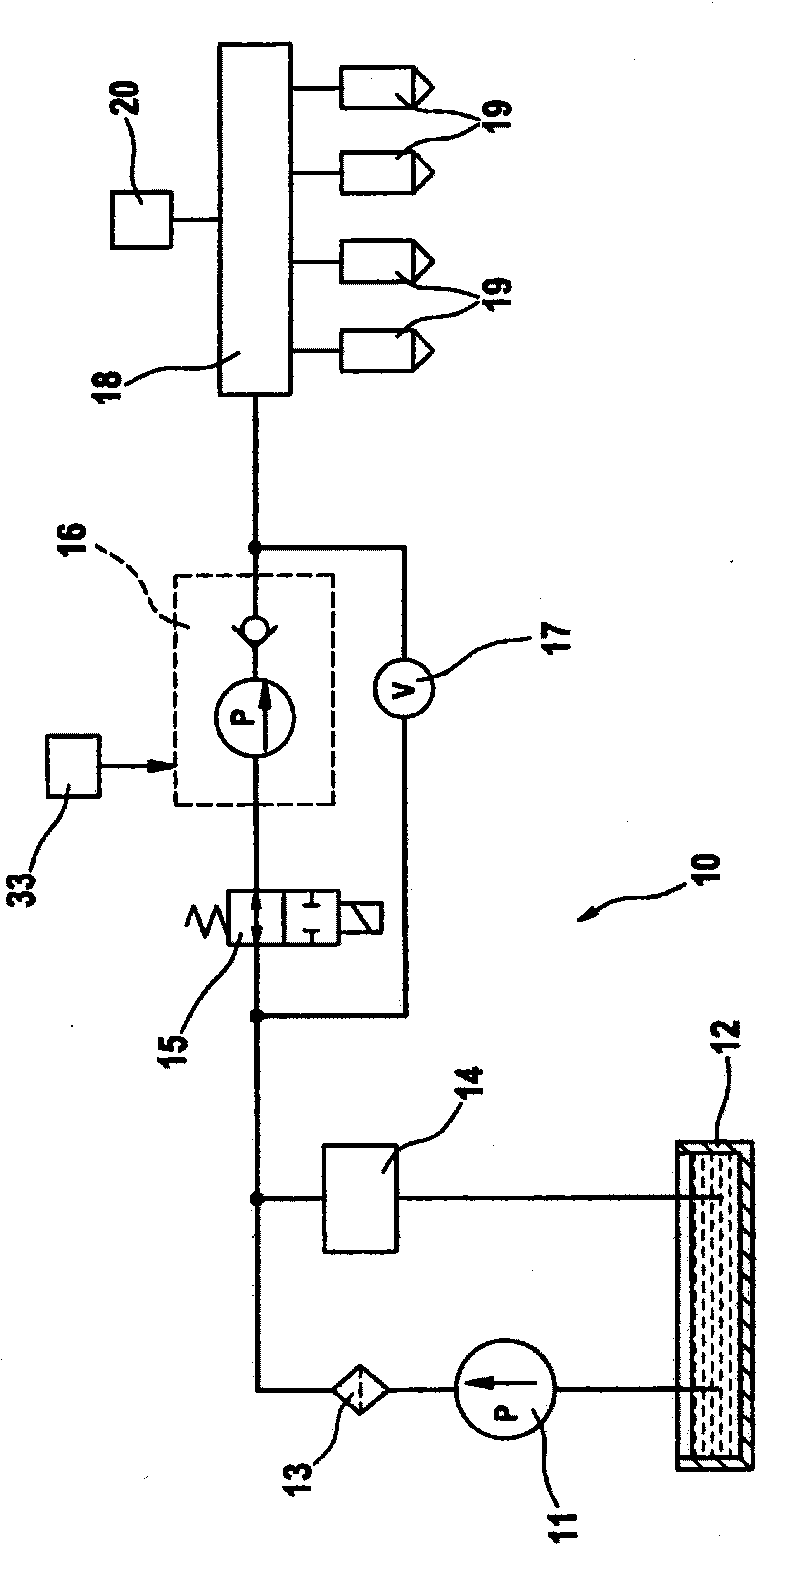 Method for controlling a solenoid valve of a quantity controller in an internal combustion engine